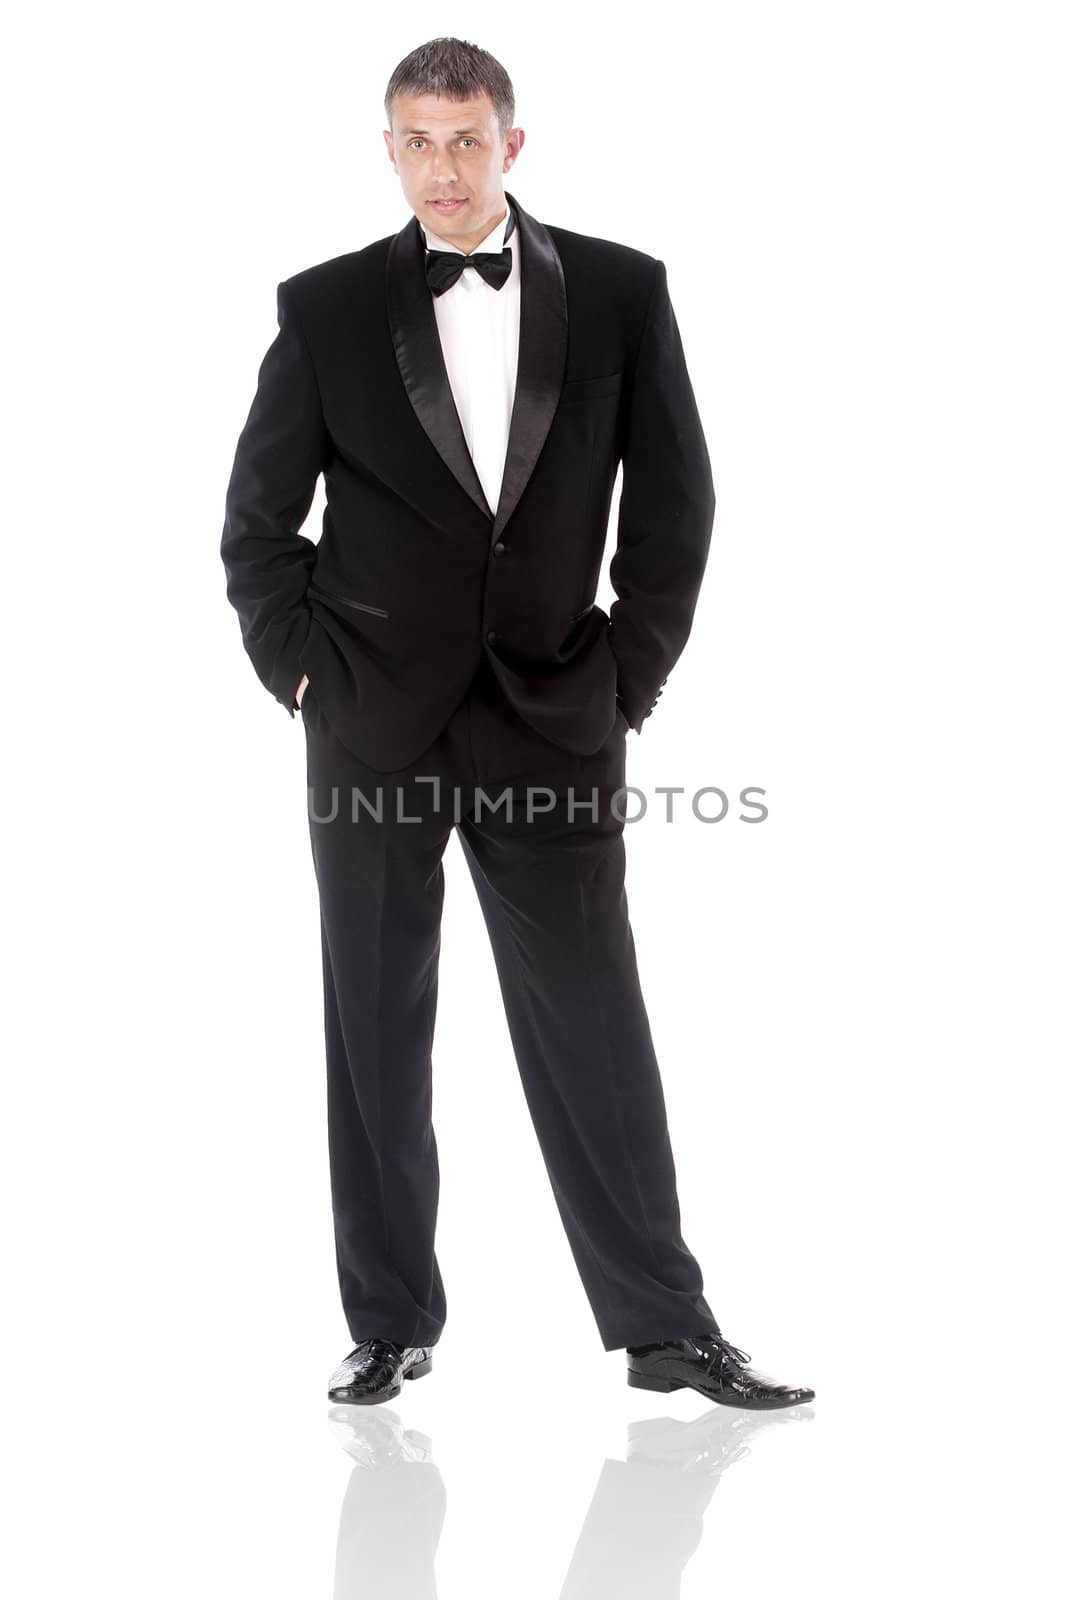 The elegant man in a classical tuxedo on a white background by sergey150770SV